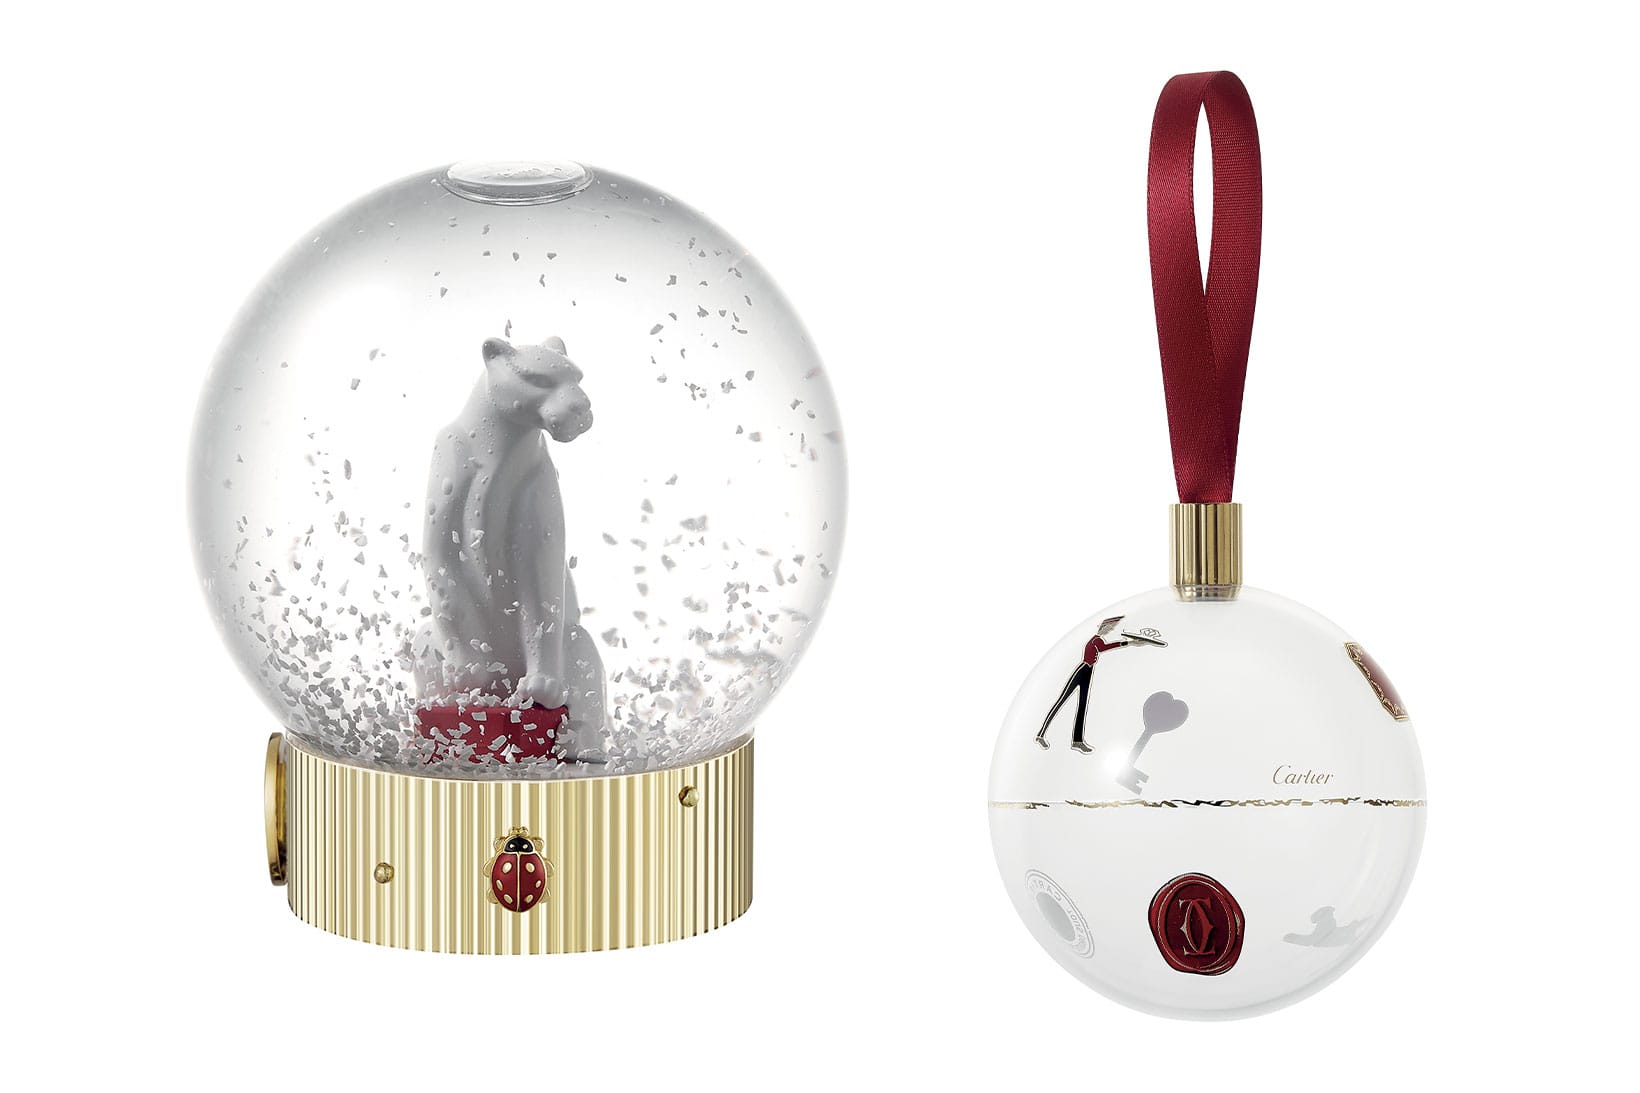 Cartier Launches New Home Objects for 